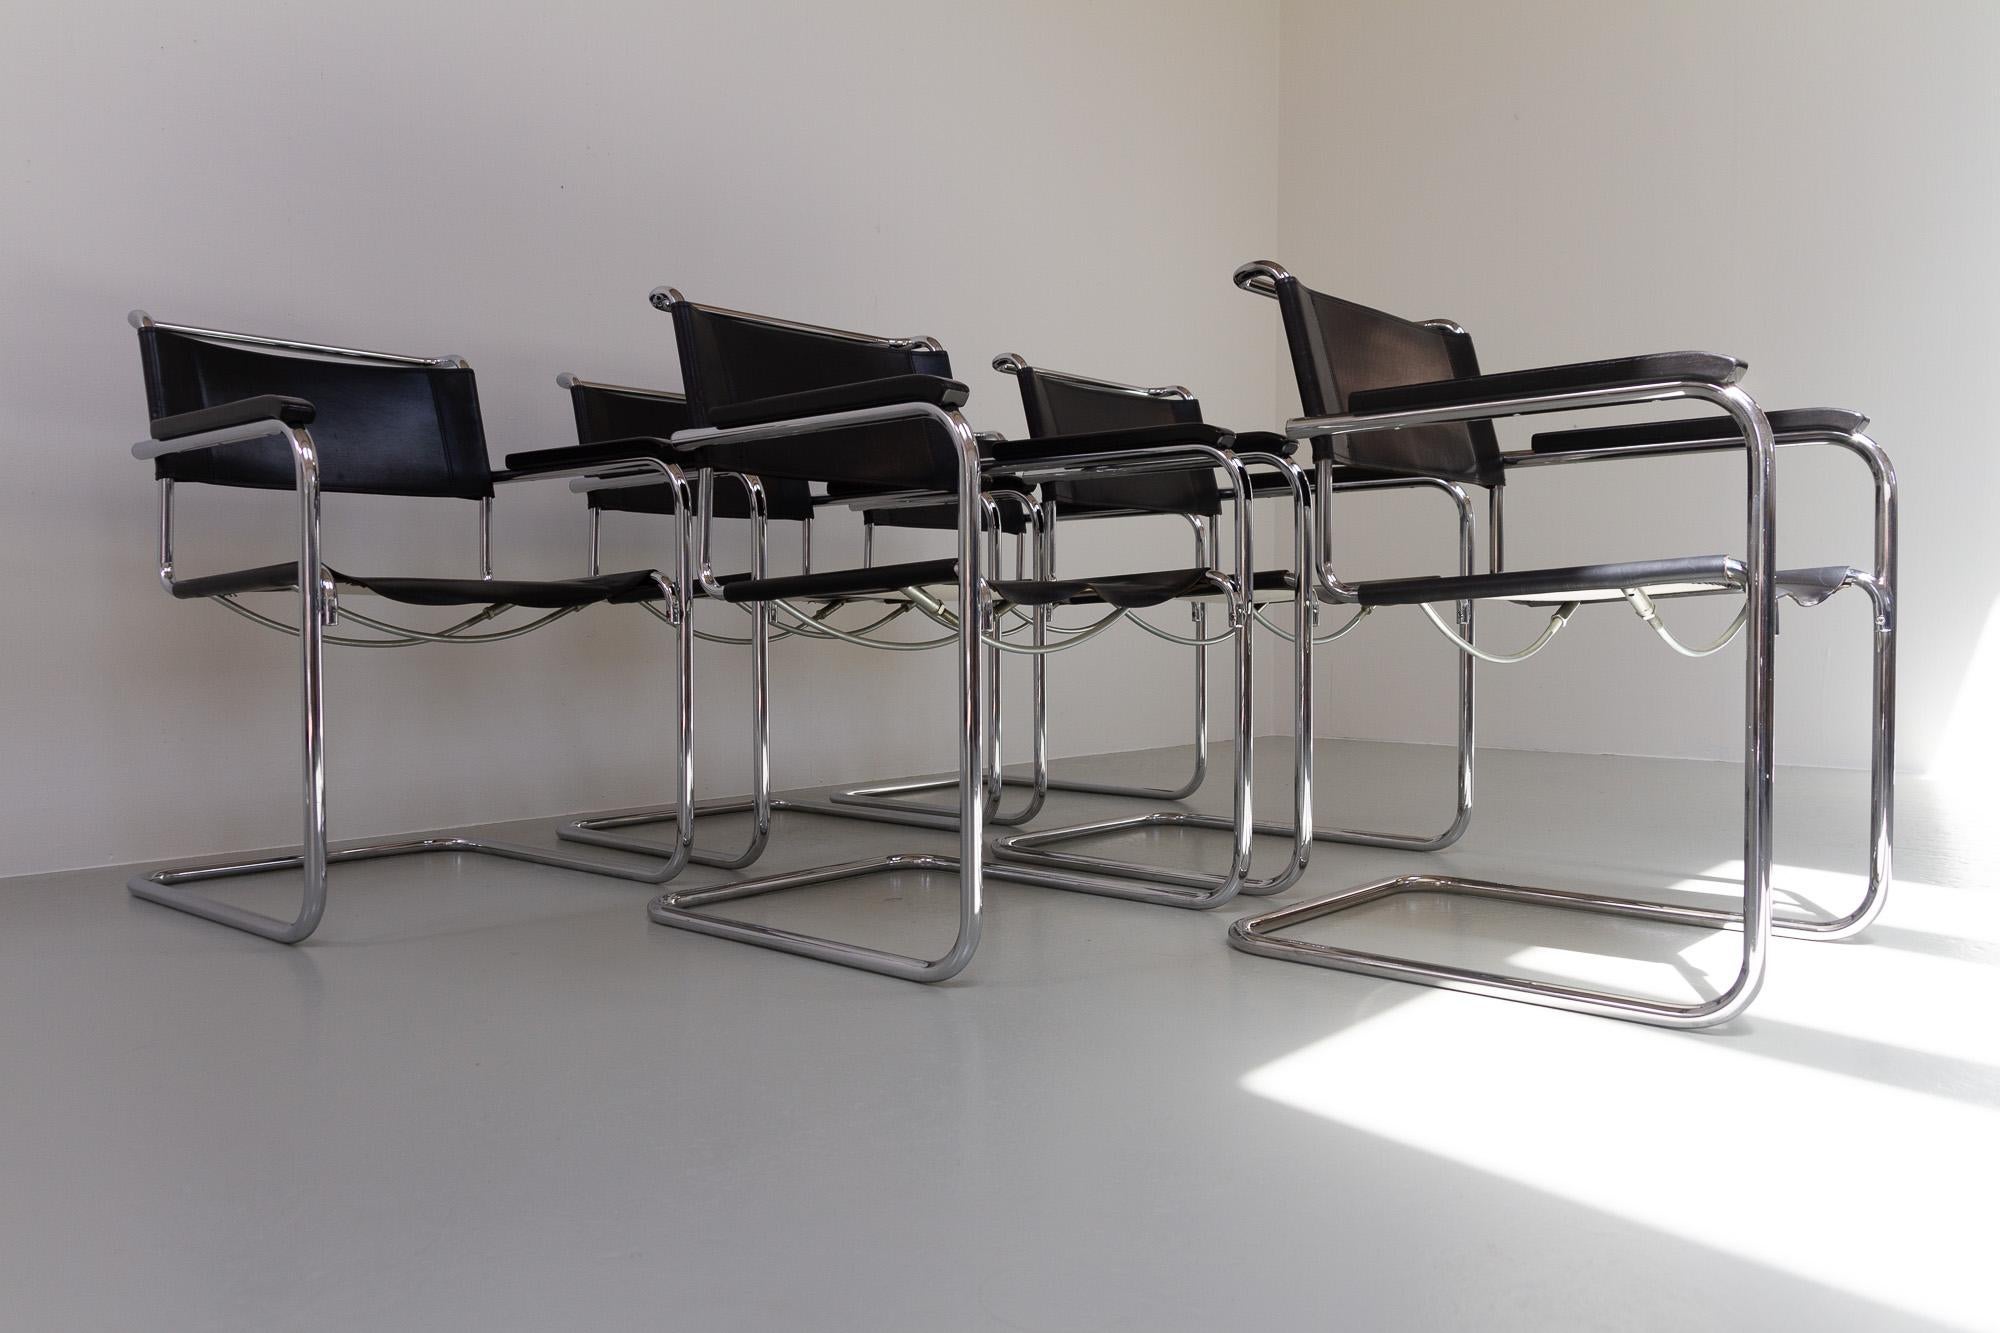 Late 20th Century Vintage Cantilever Chairs S34 by Mart Stam for Thonet, 1980s. Set of 6.